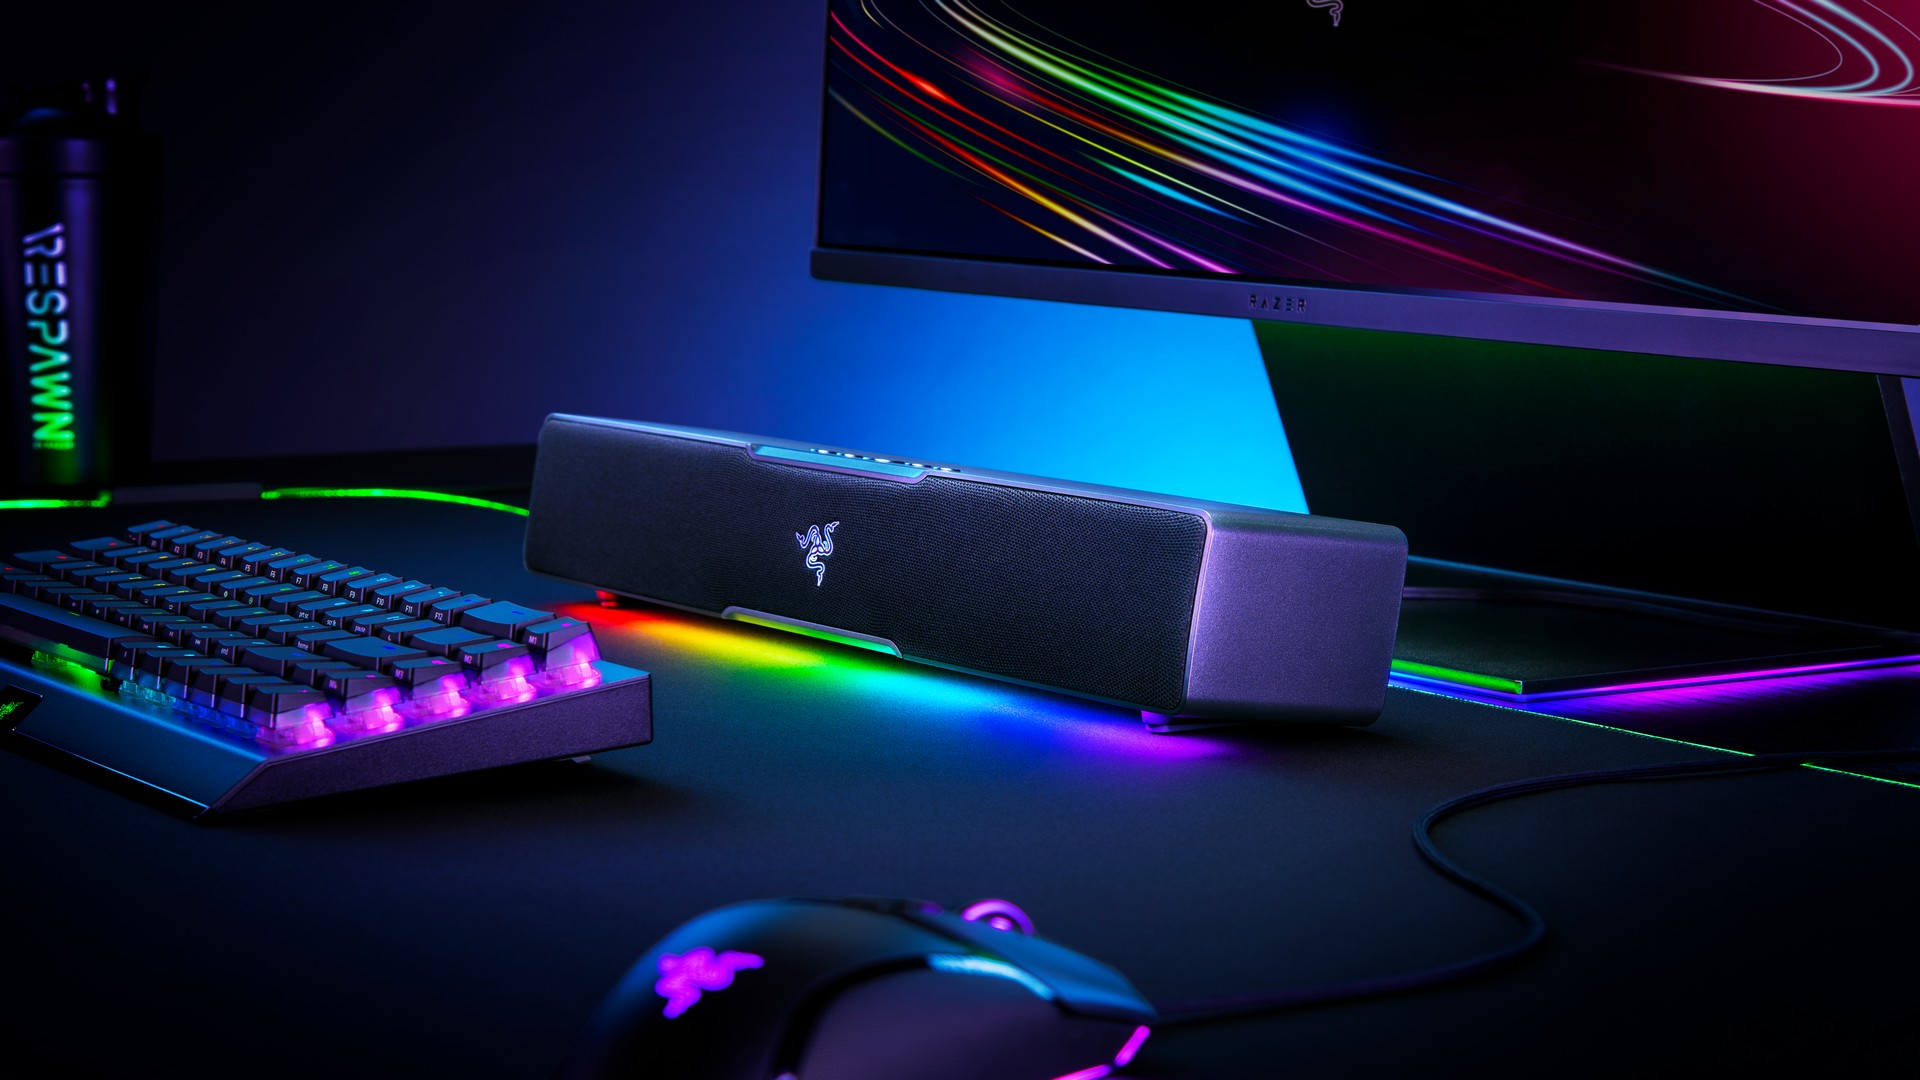 Experience Powerful, Immersive Audio In A Compact Form Factor With The New Razer Leviathan V2 X PC Soundbar